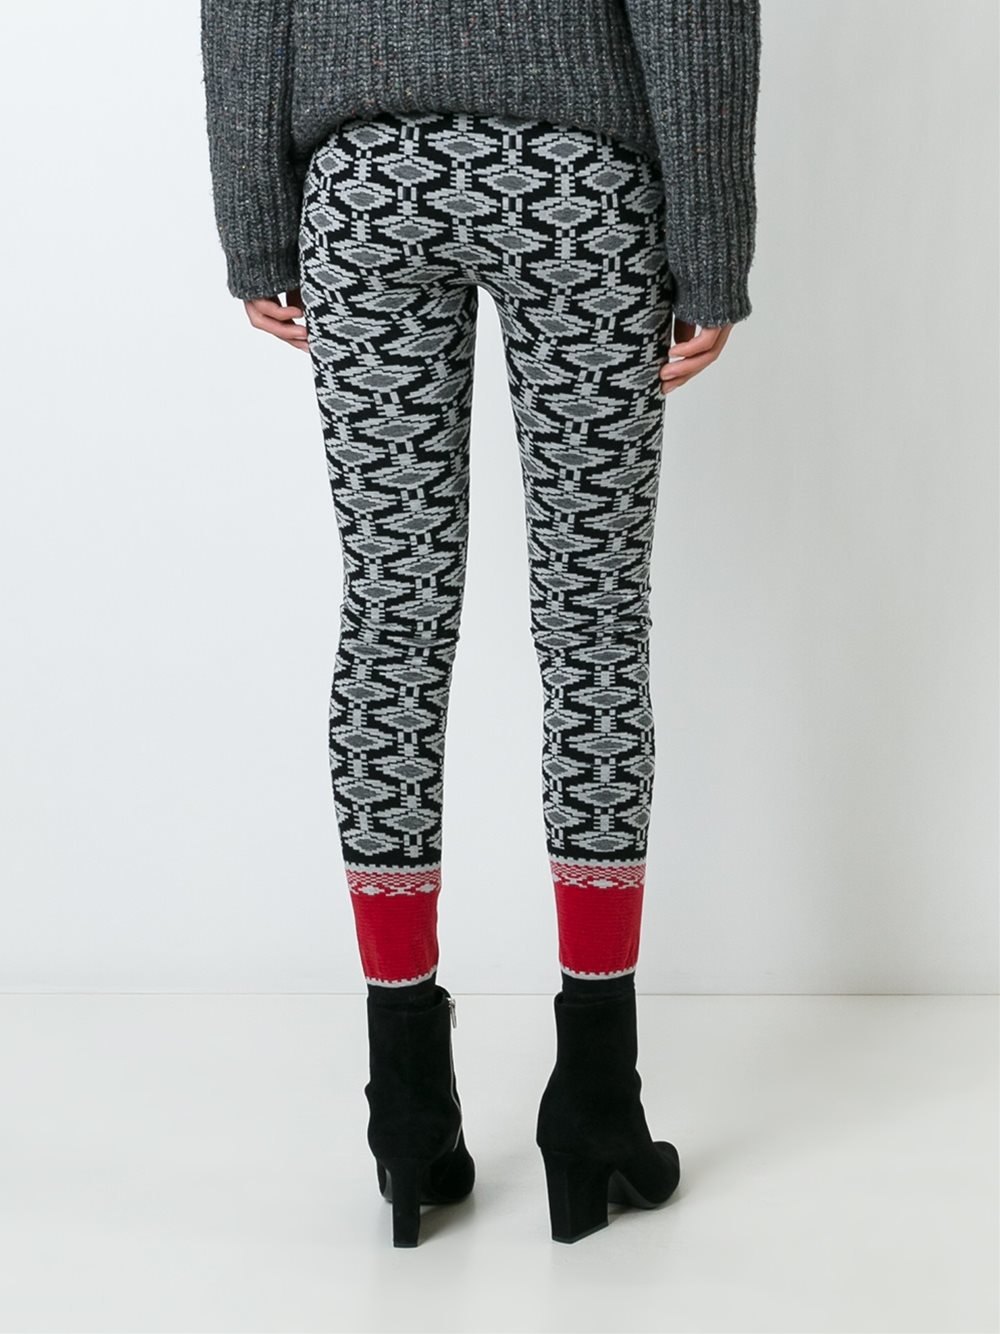 Winter Leggings For Ladies  International Society of Precision Agriculture